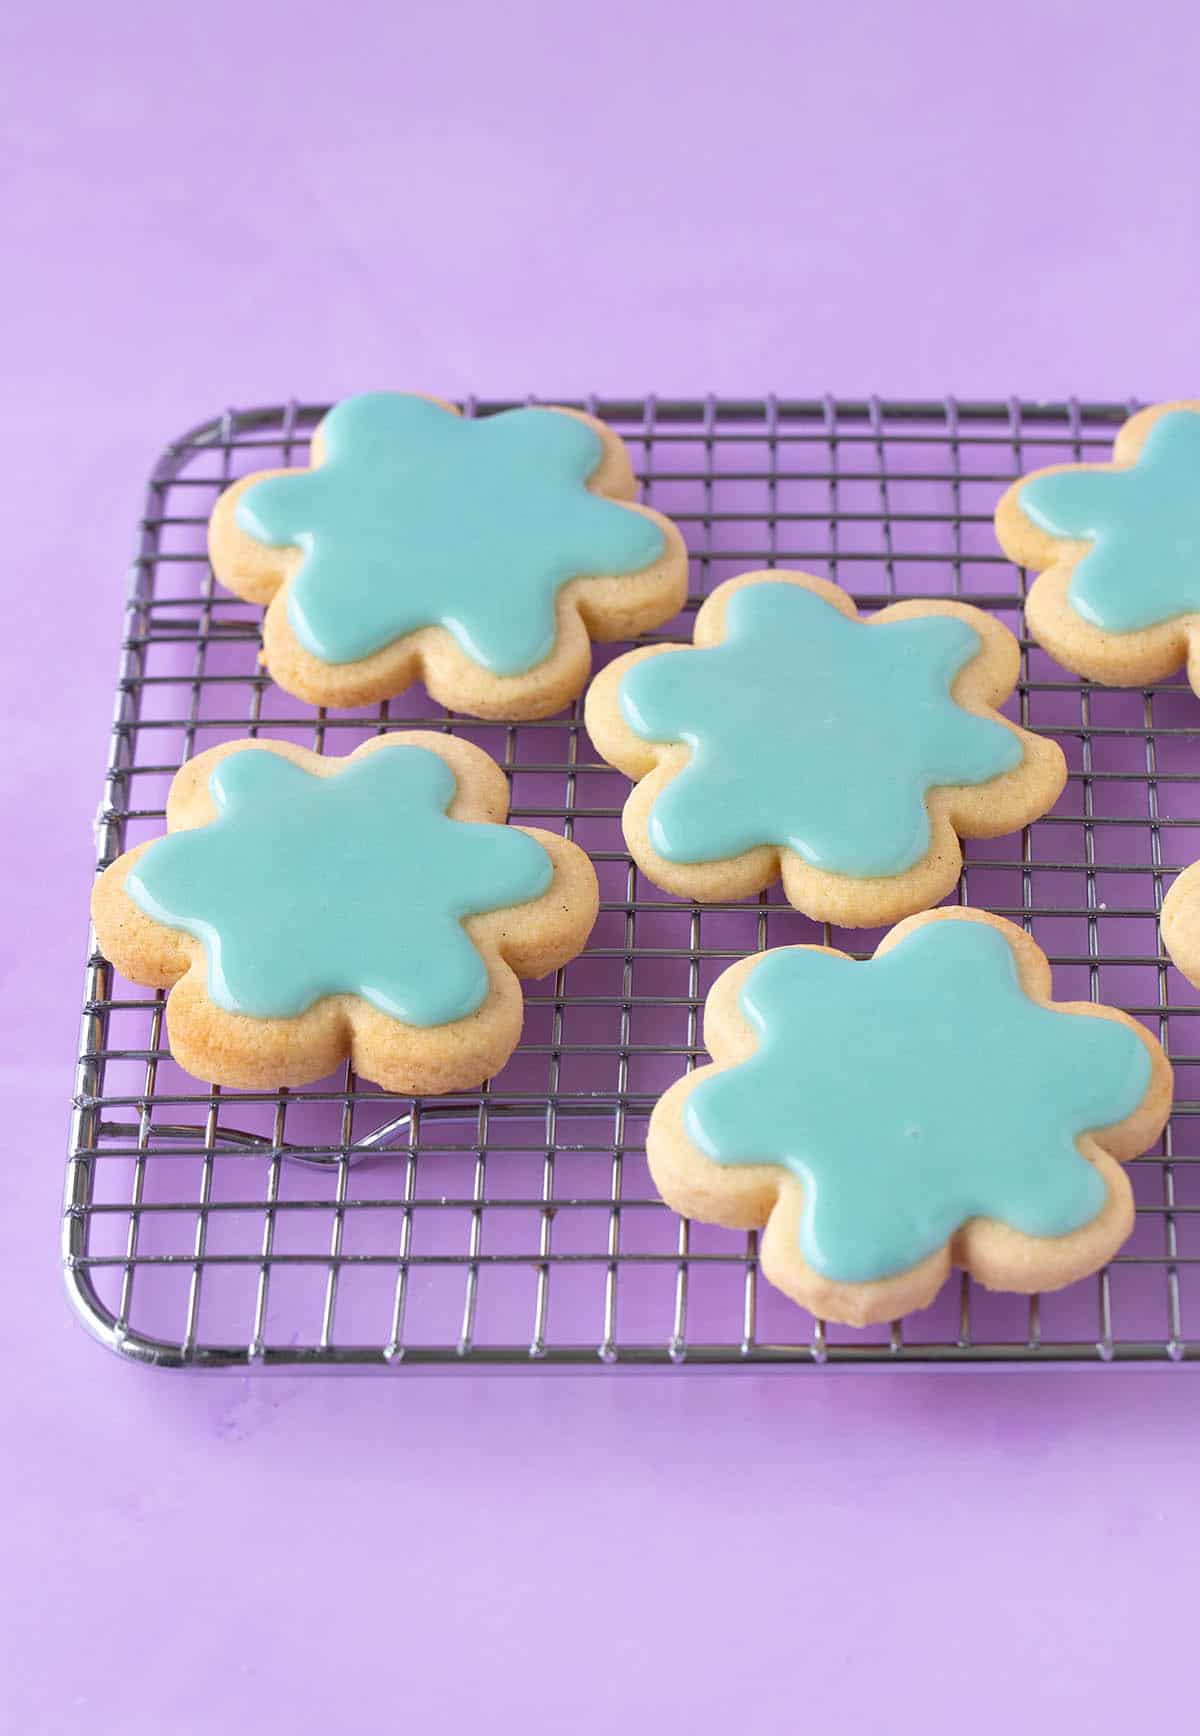 Flower-shaped Sugar Cookies covered in a green icing sugar glaze.